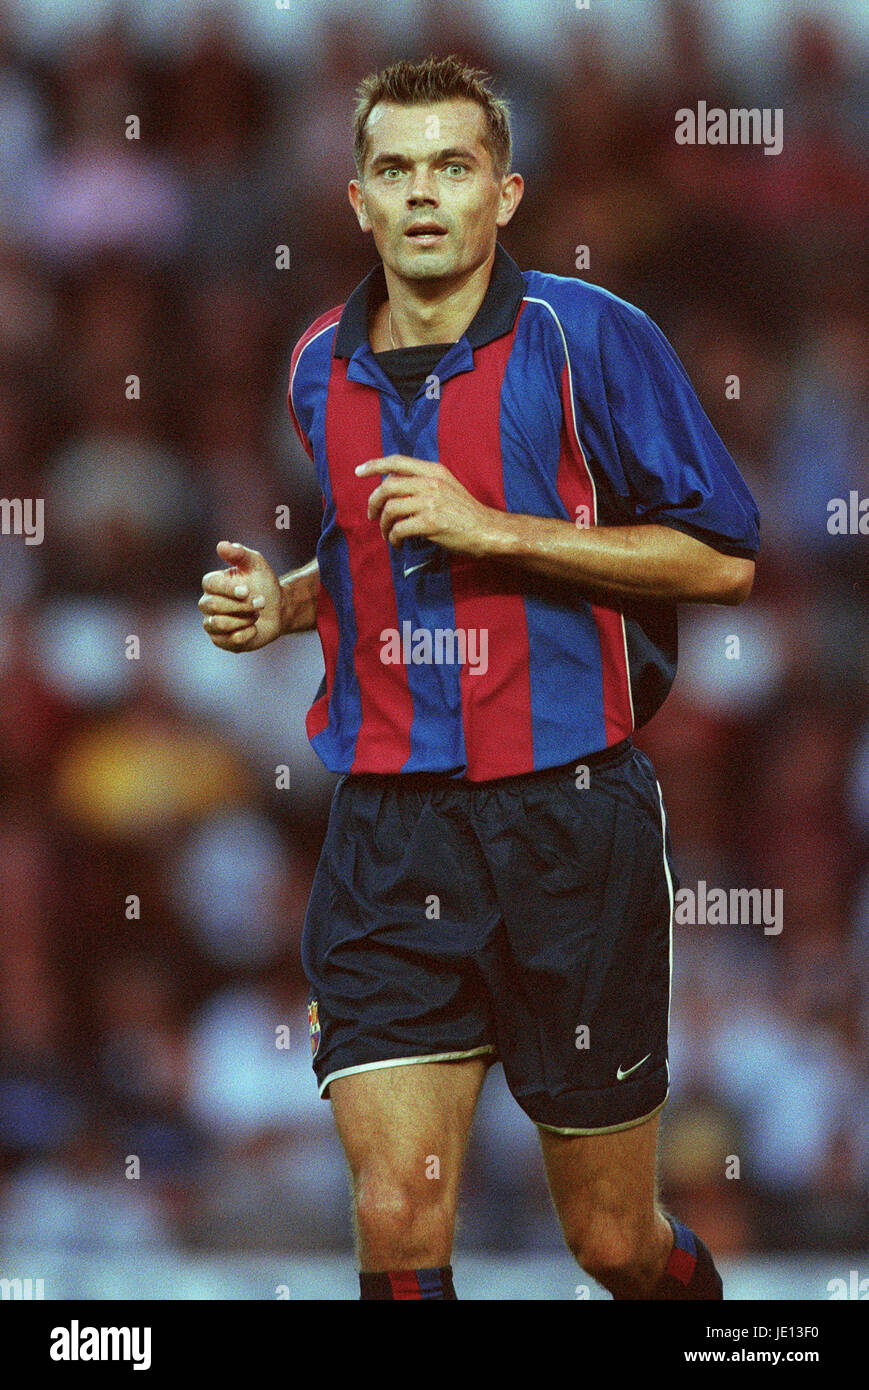 PHILIP COCU FC BARCELONE DERBY DERBY COUNTY V BARCELONE 10 Août 2001 Banque D'Images